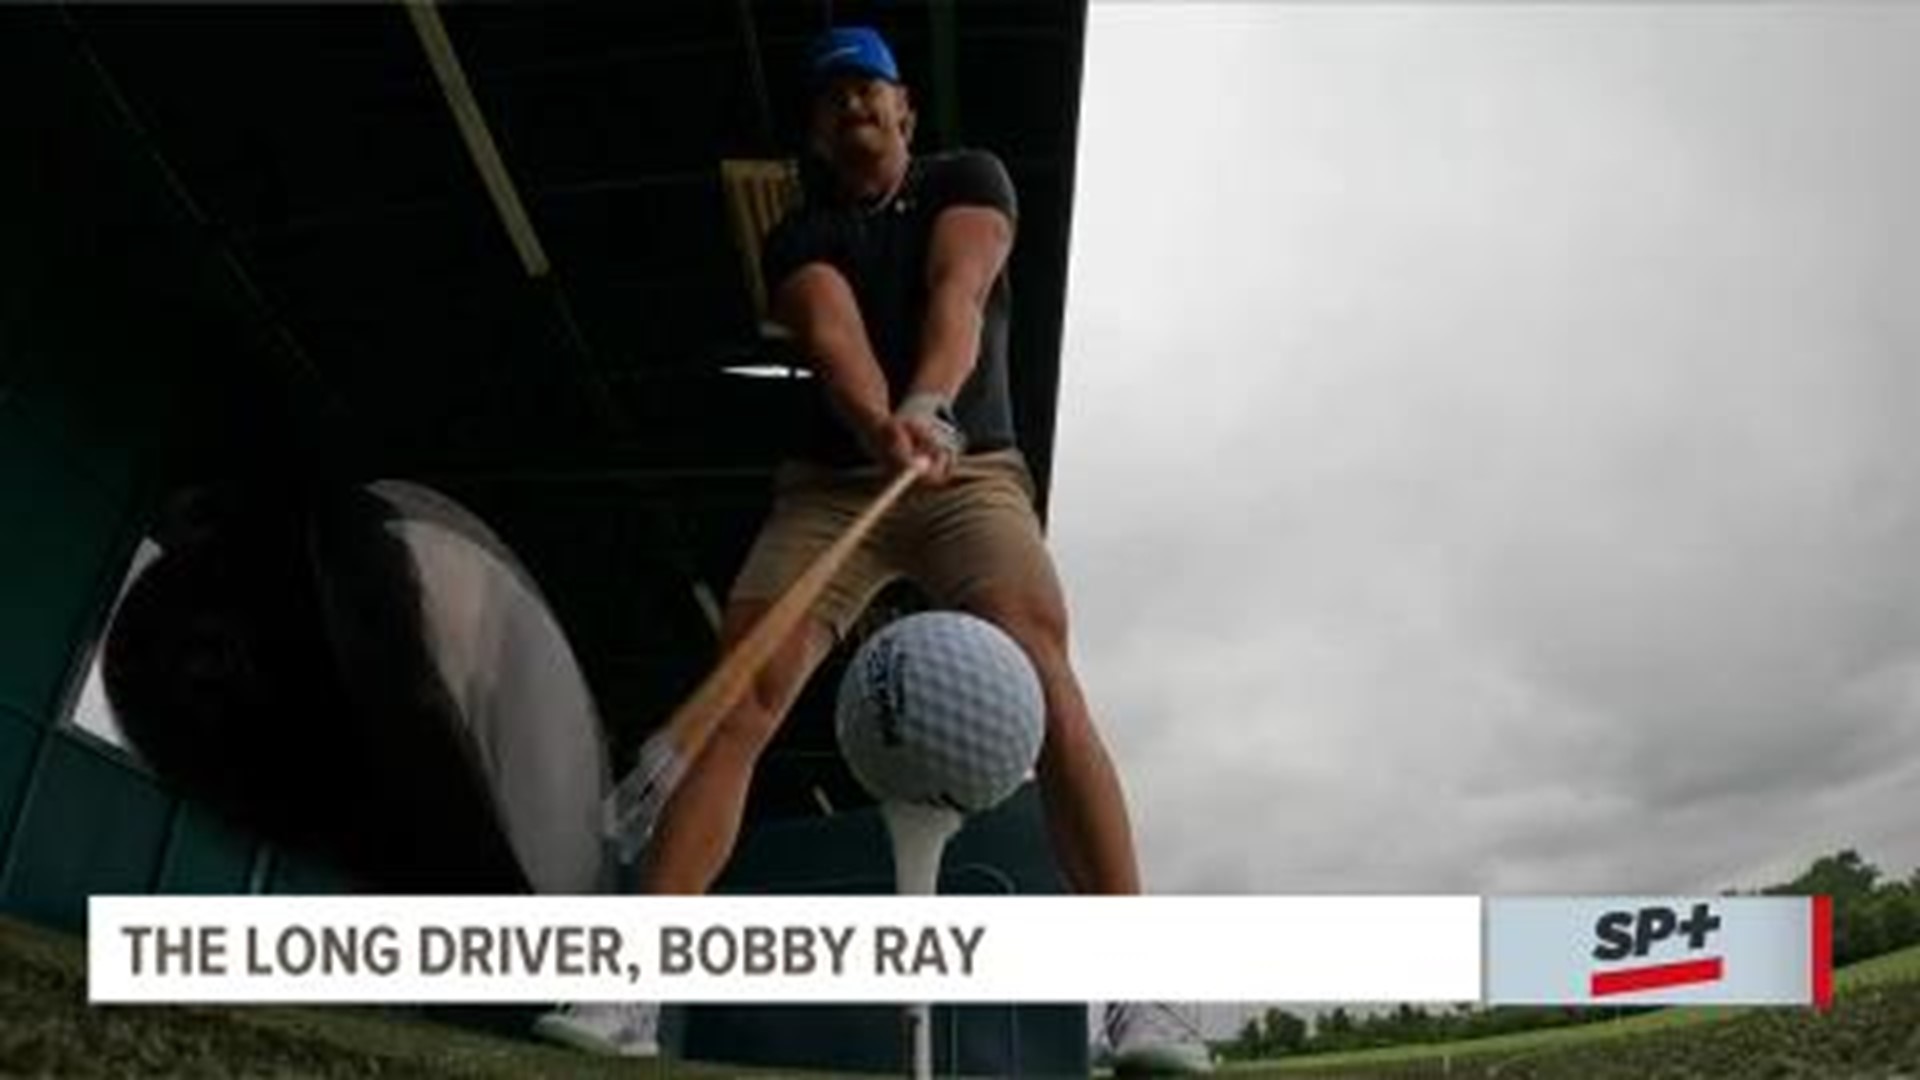 Bobby Ray doesn't just hit golf balls. He destroys them. This is a story that all golf lovers will be intrigued by.